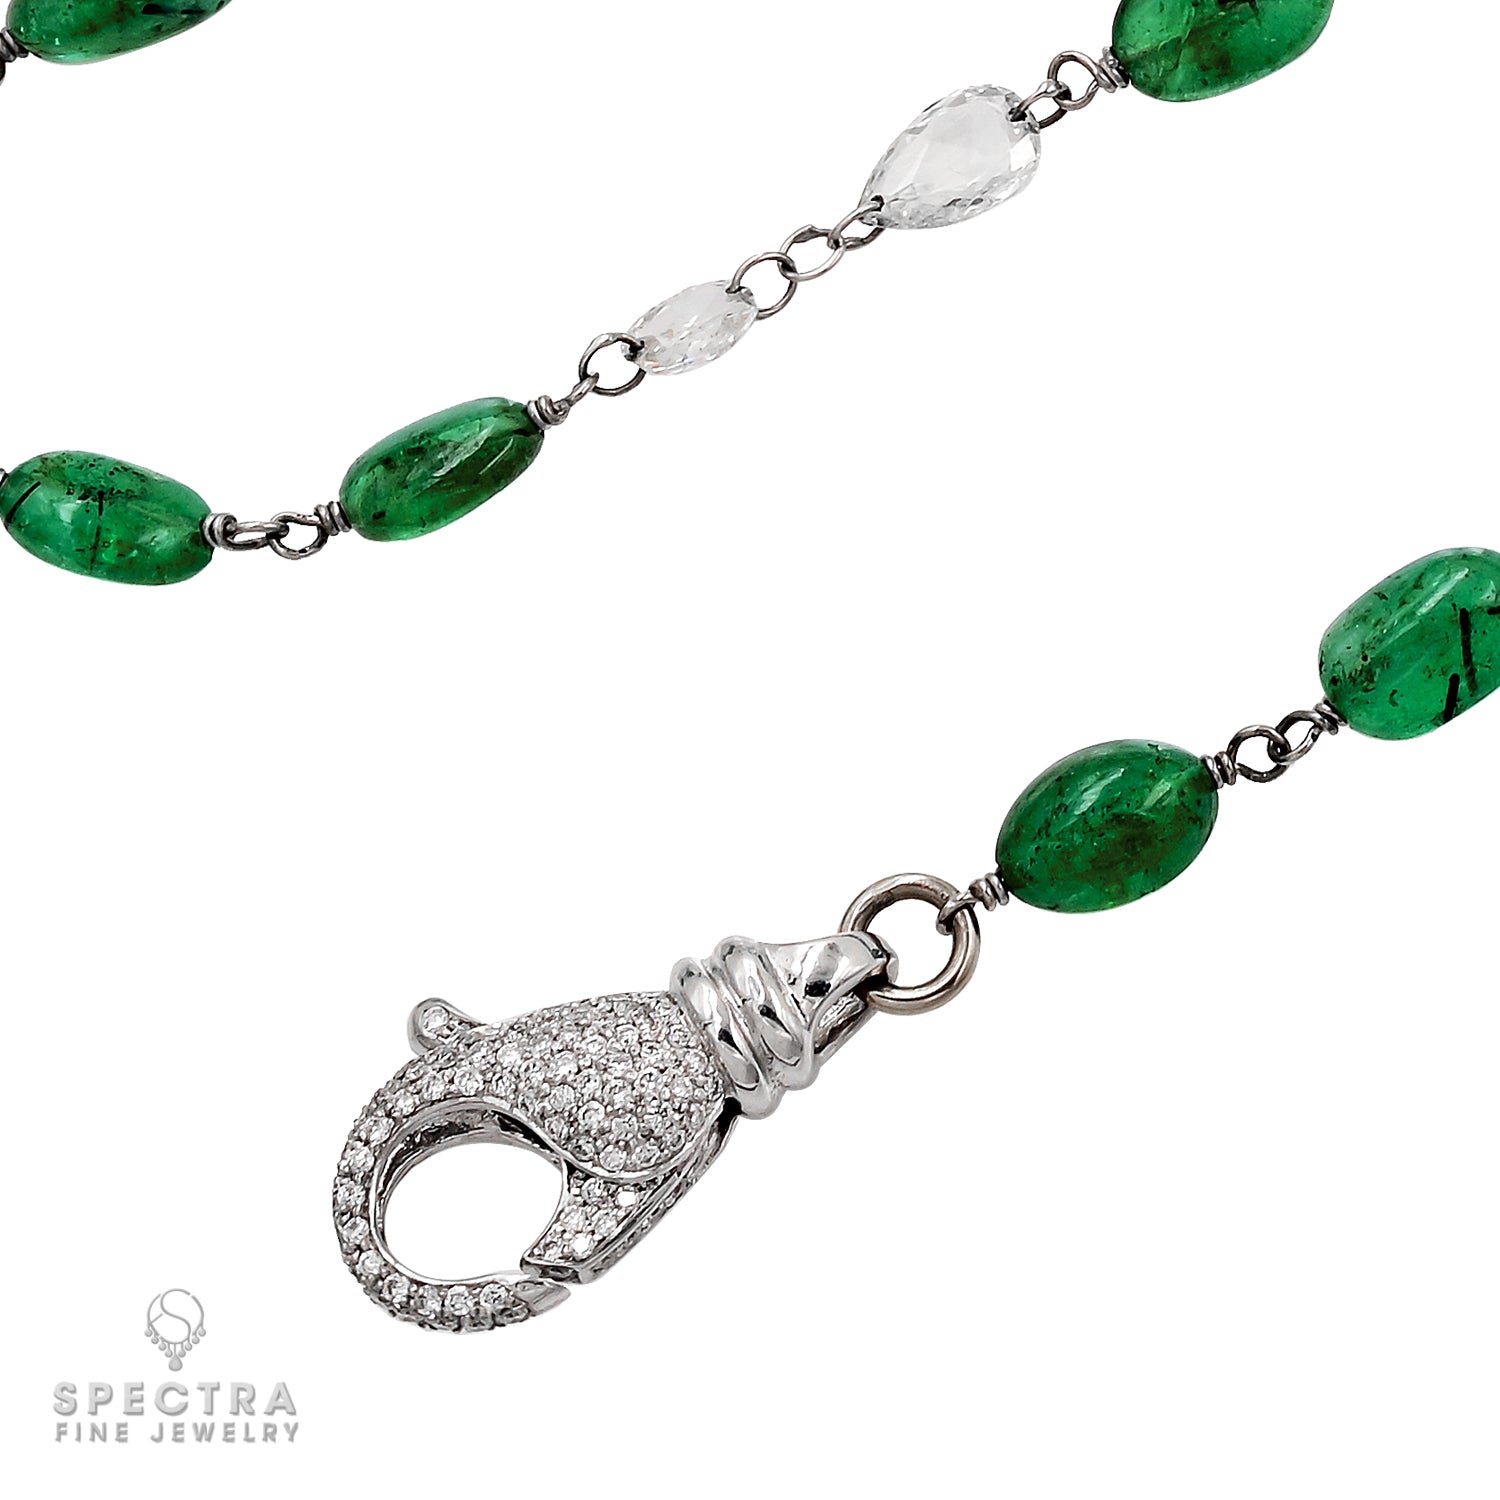 Spectra Fine Jewelry Emerald Convertible Matinee Necklace